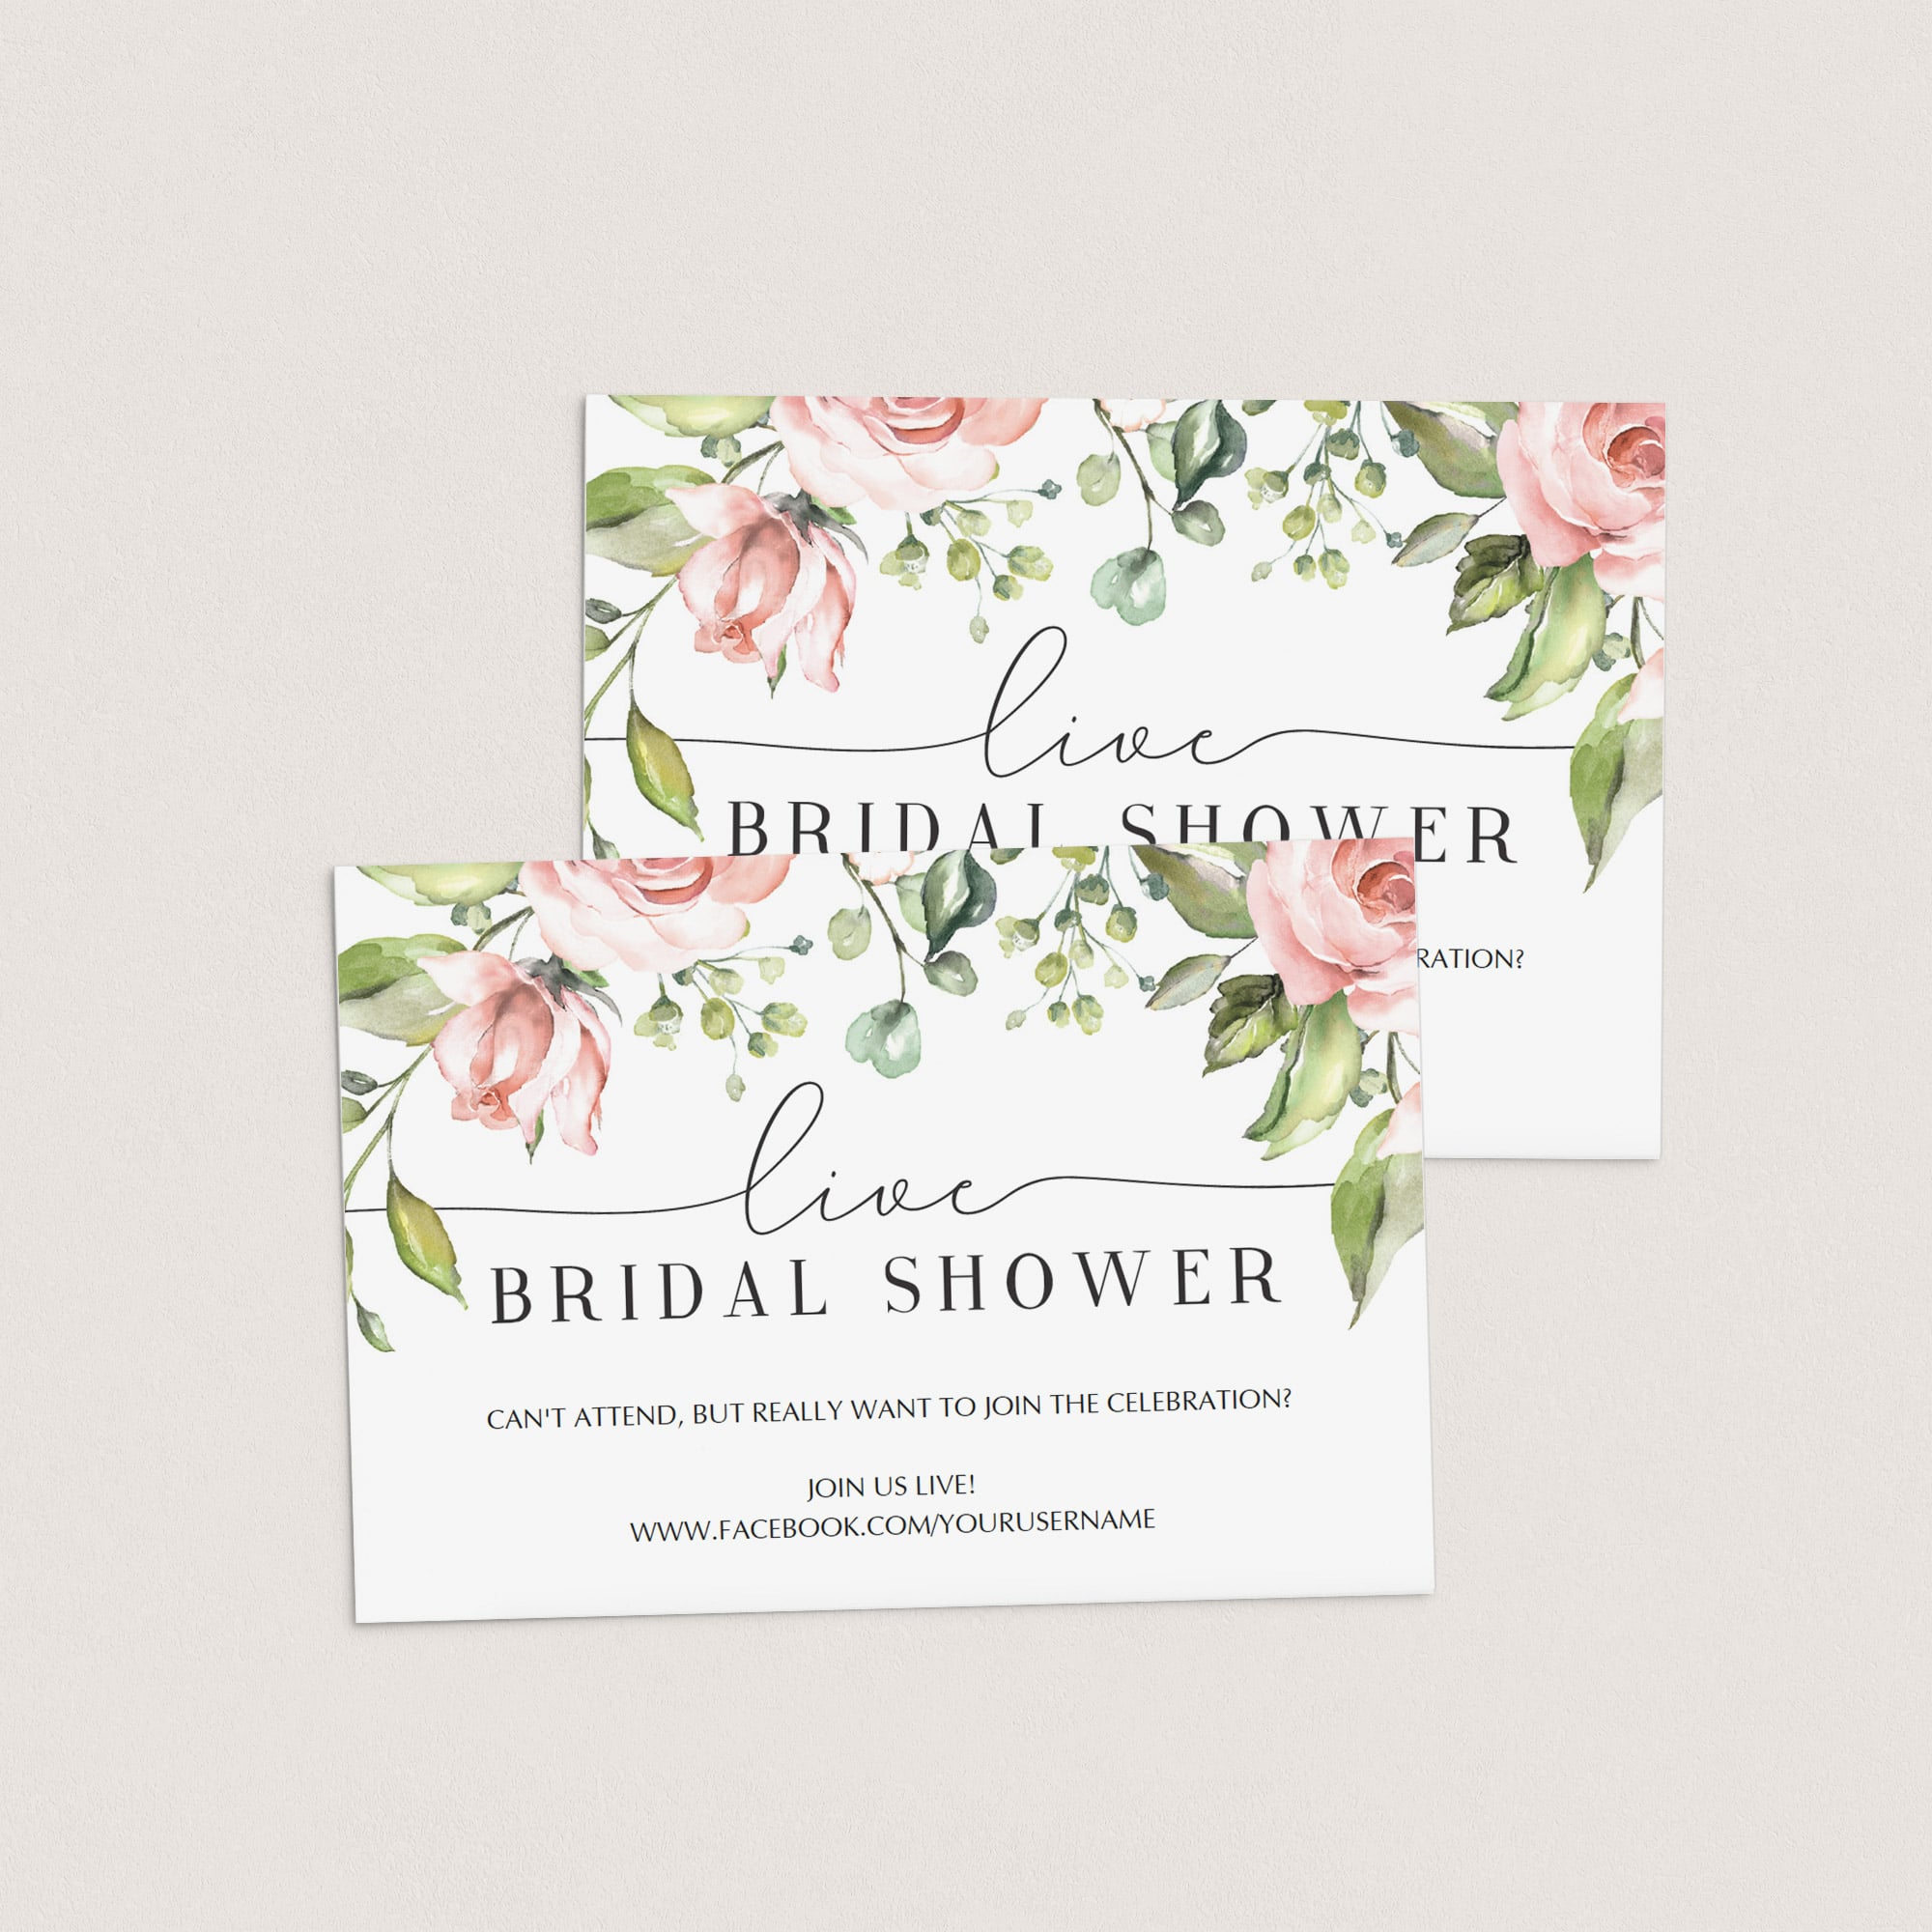 Web bridal shower announcement cards by LittleSizzle